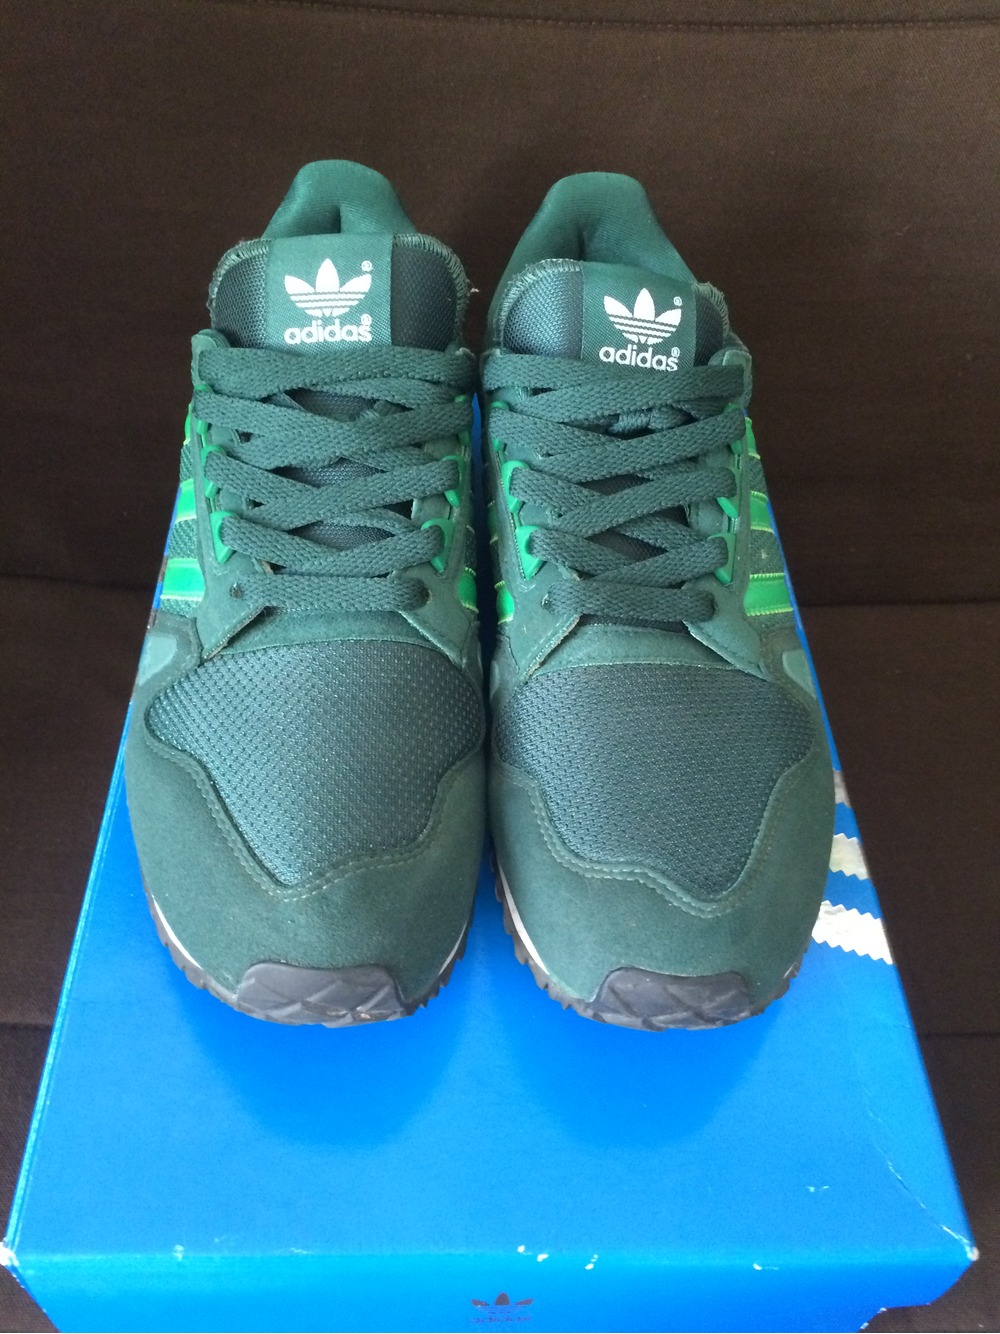 adidas zx 450 for sale